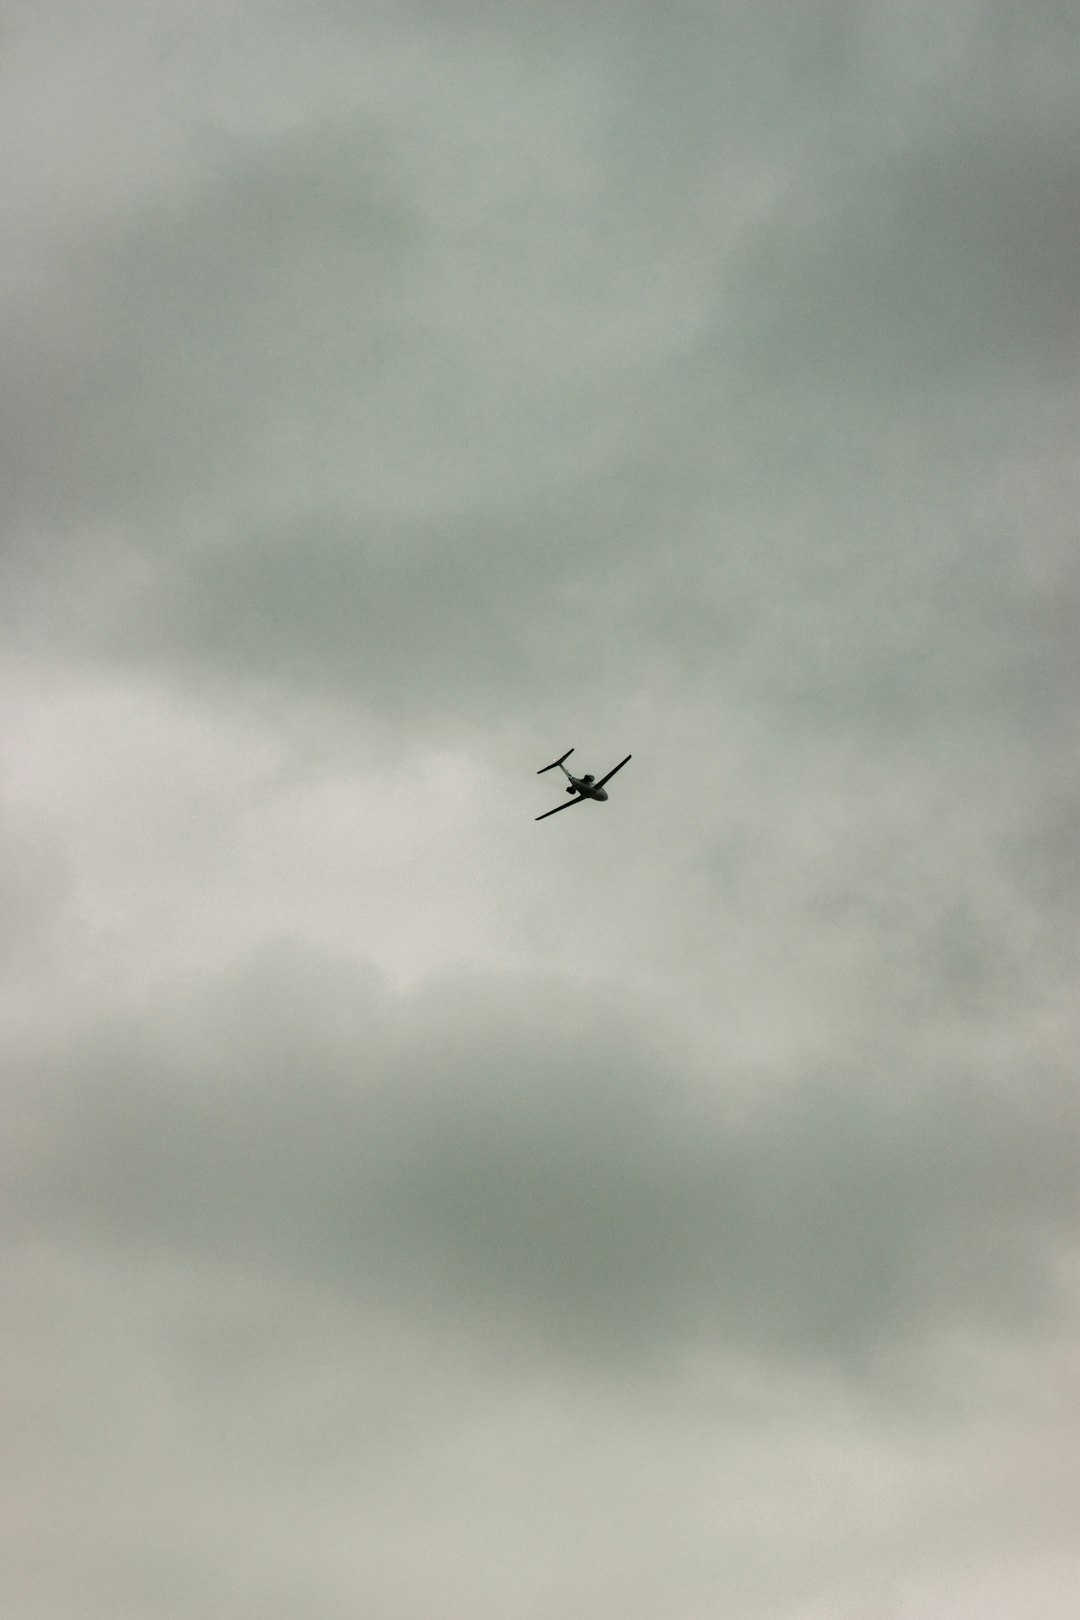 airplane in mid air under cloudy sky during daytime